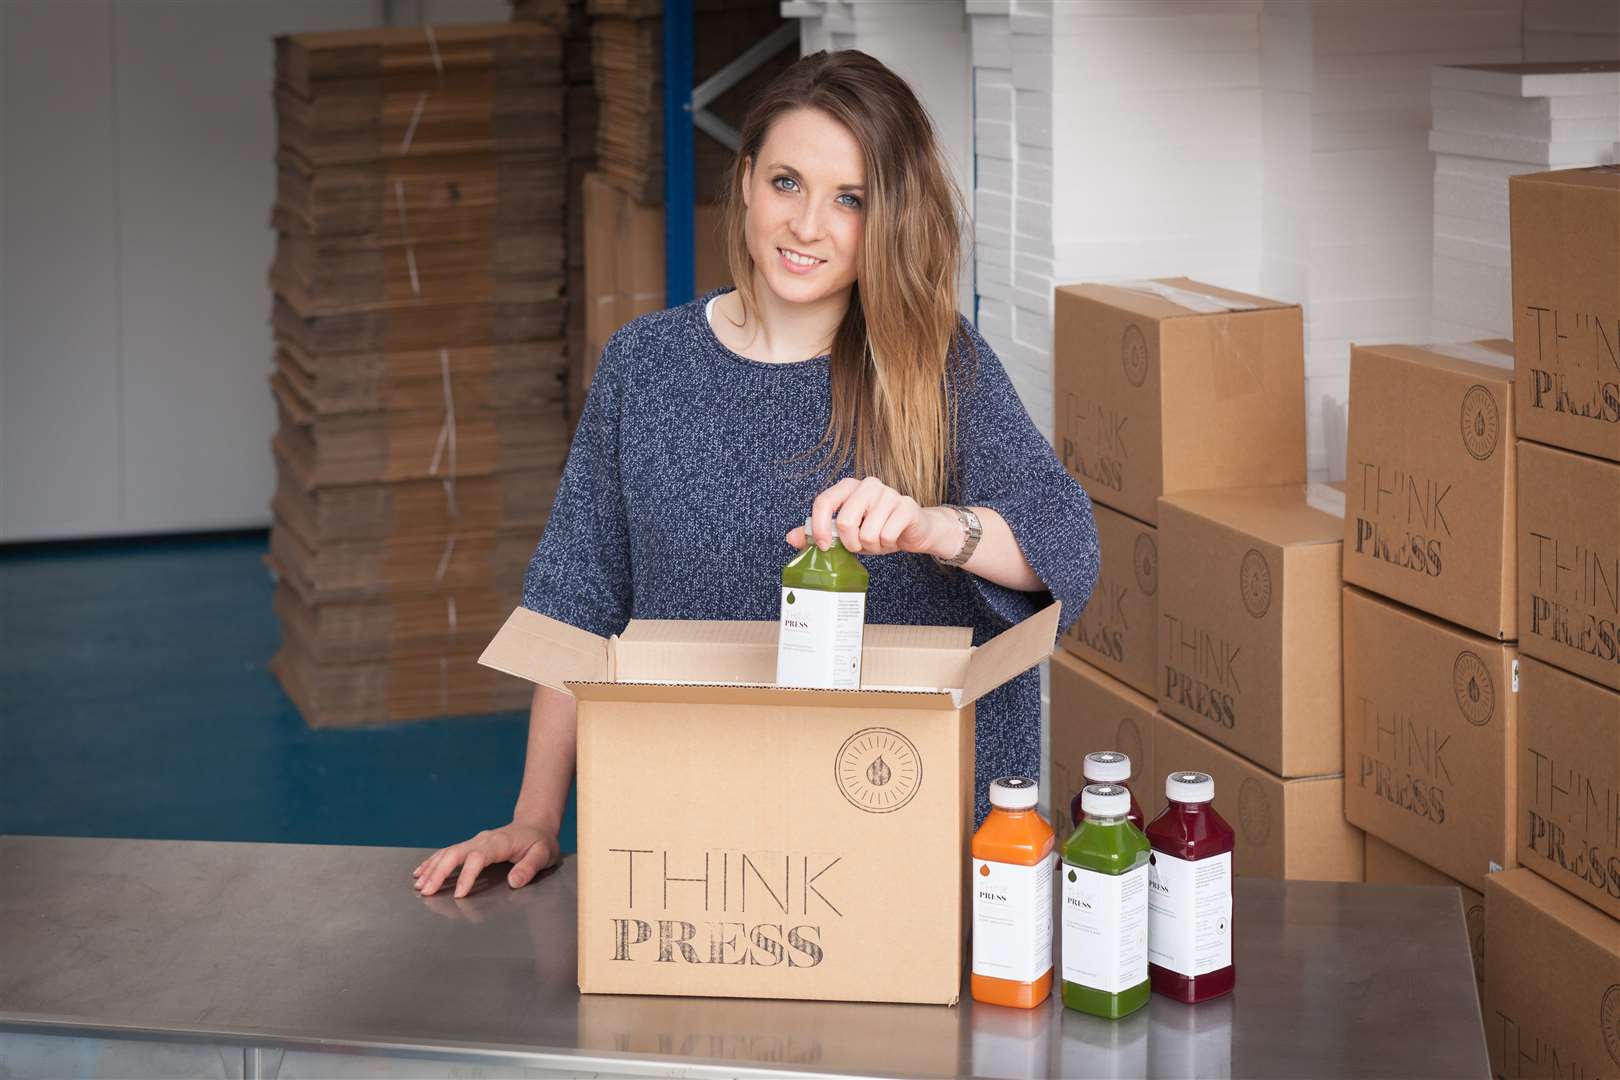 The Juice Executive and Think Press managing director Alexandra Auger